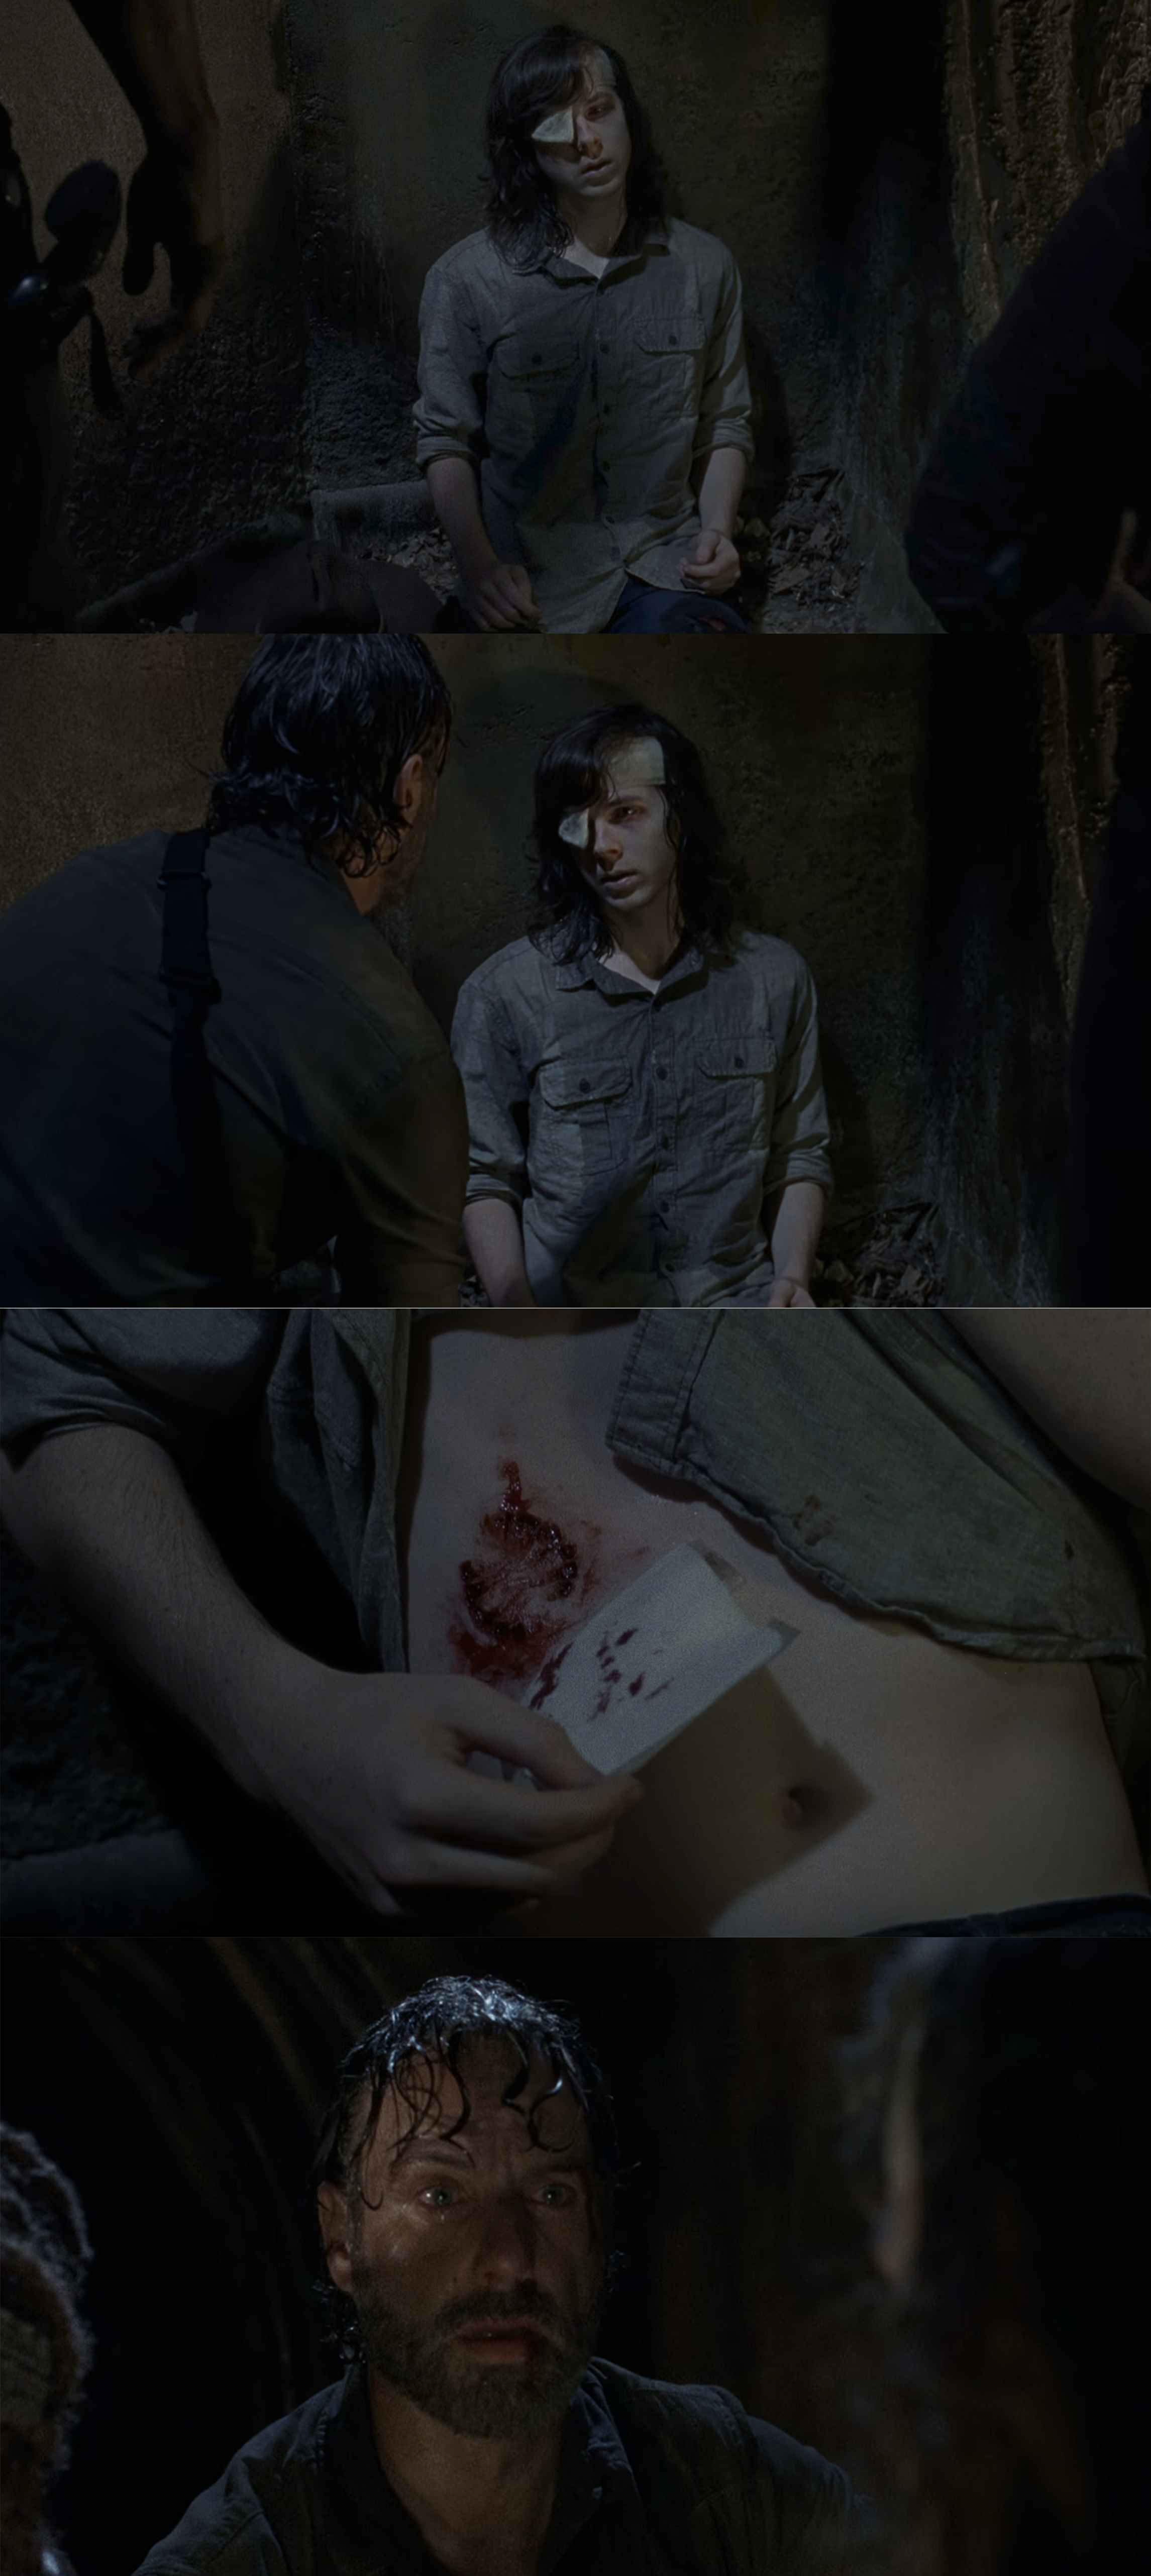 carl showing his bite wound on his stomach